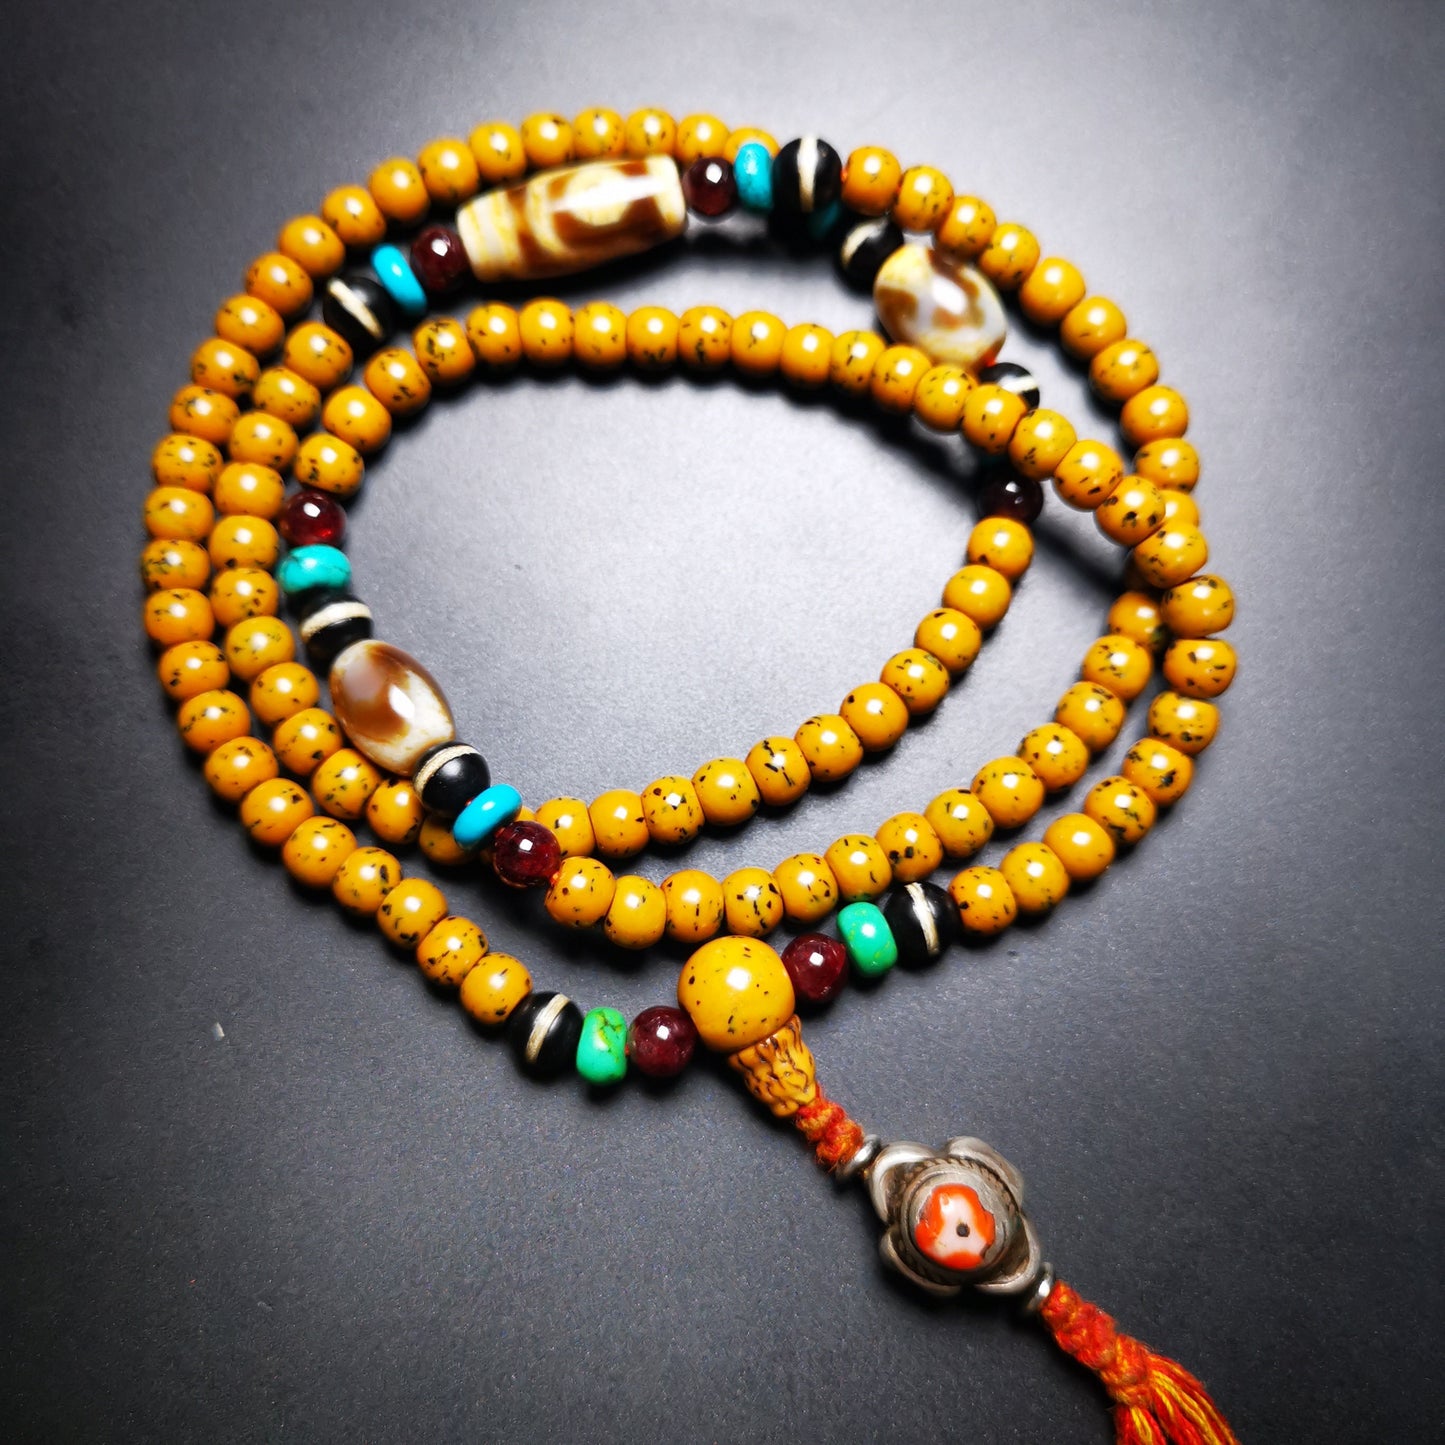 SOLD - Handmade Old Mala,Prayer Beads Necklace,Assorted Bodhi,Dzi,Turquoise,Agate, for Meditation and Prayer,80 Years Old